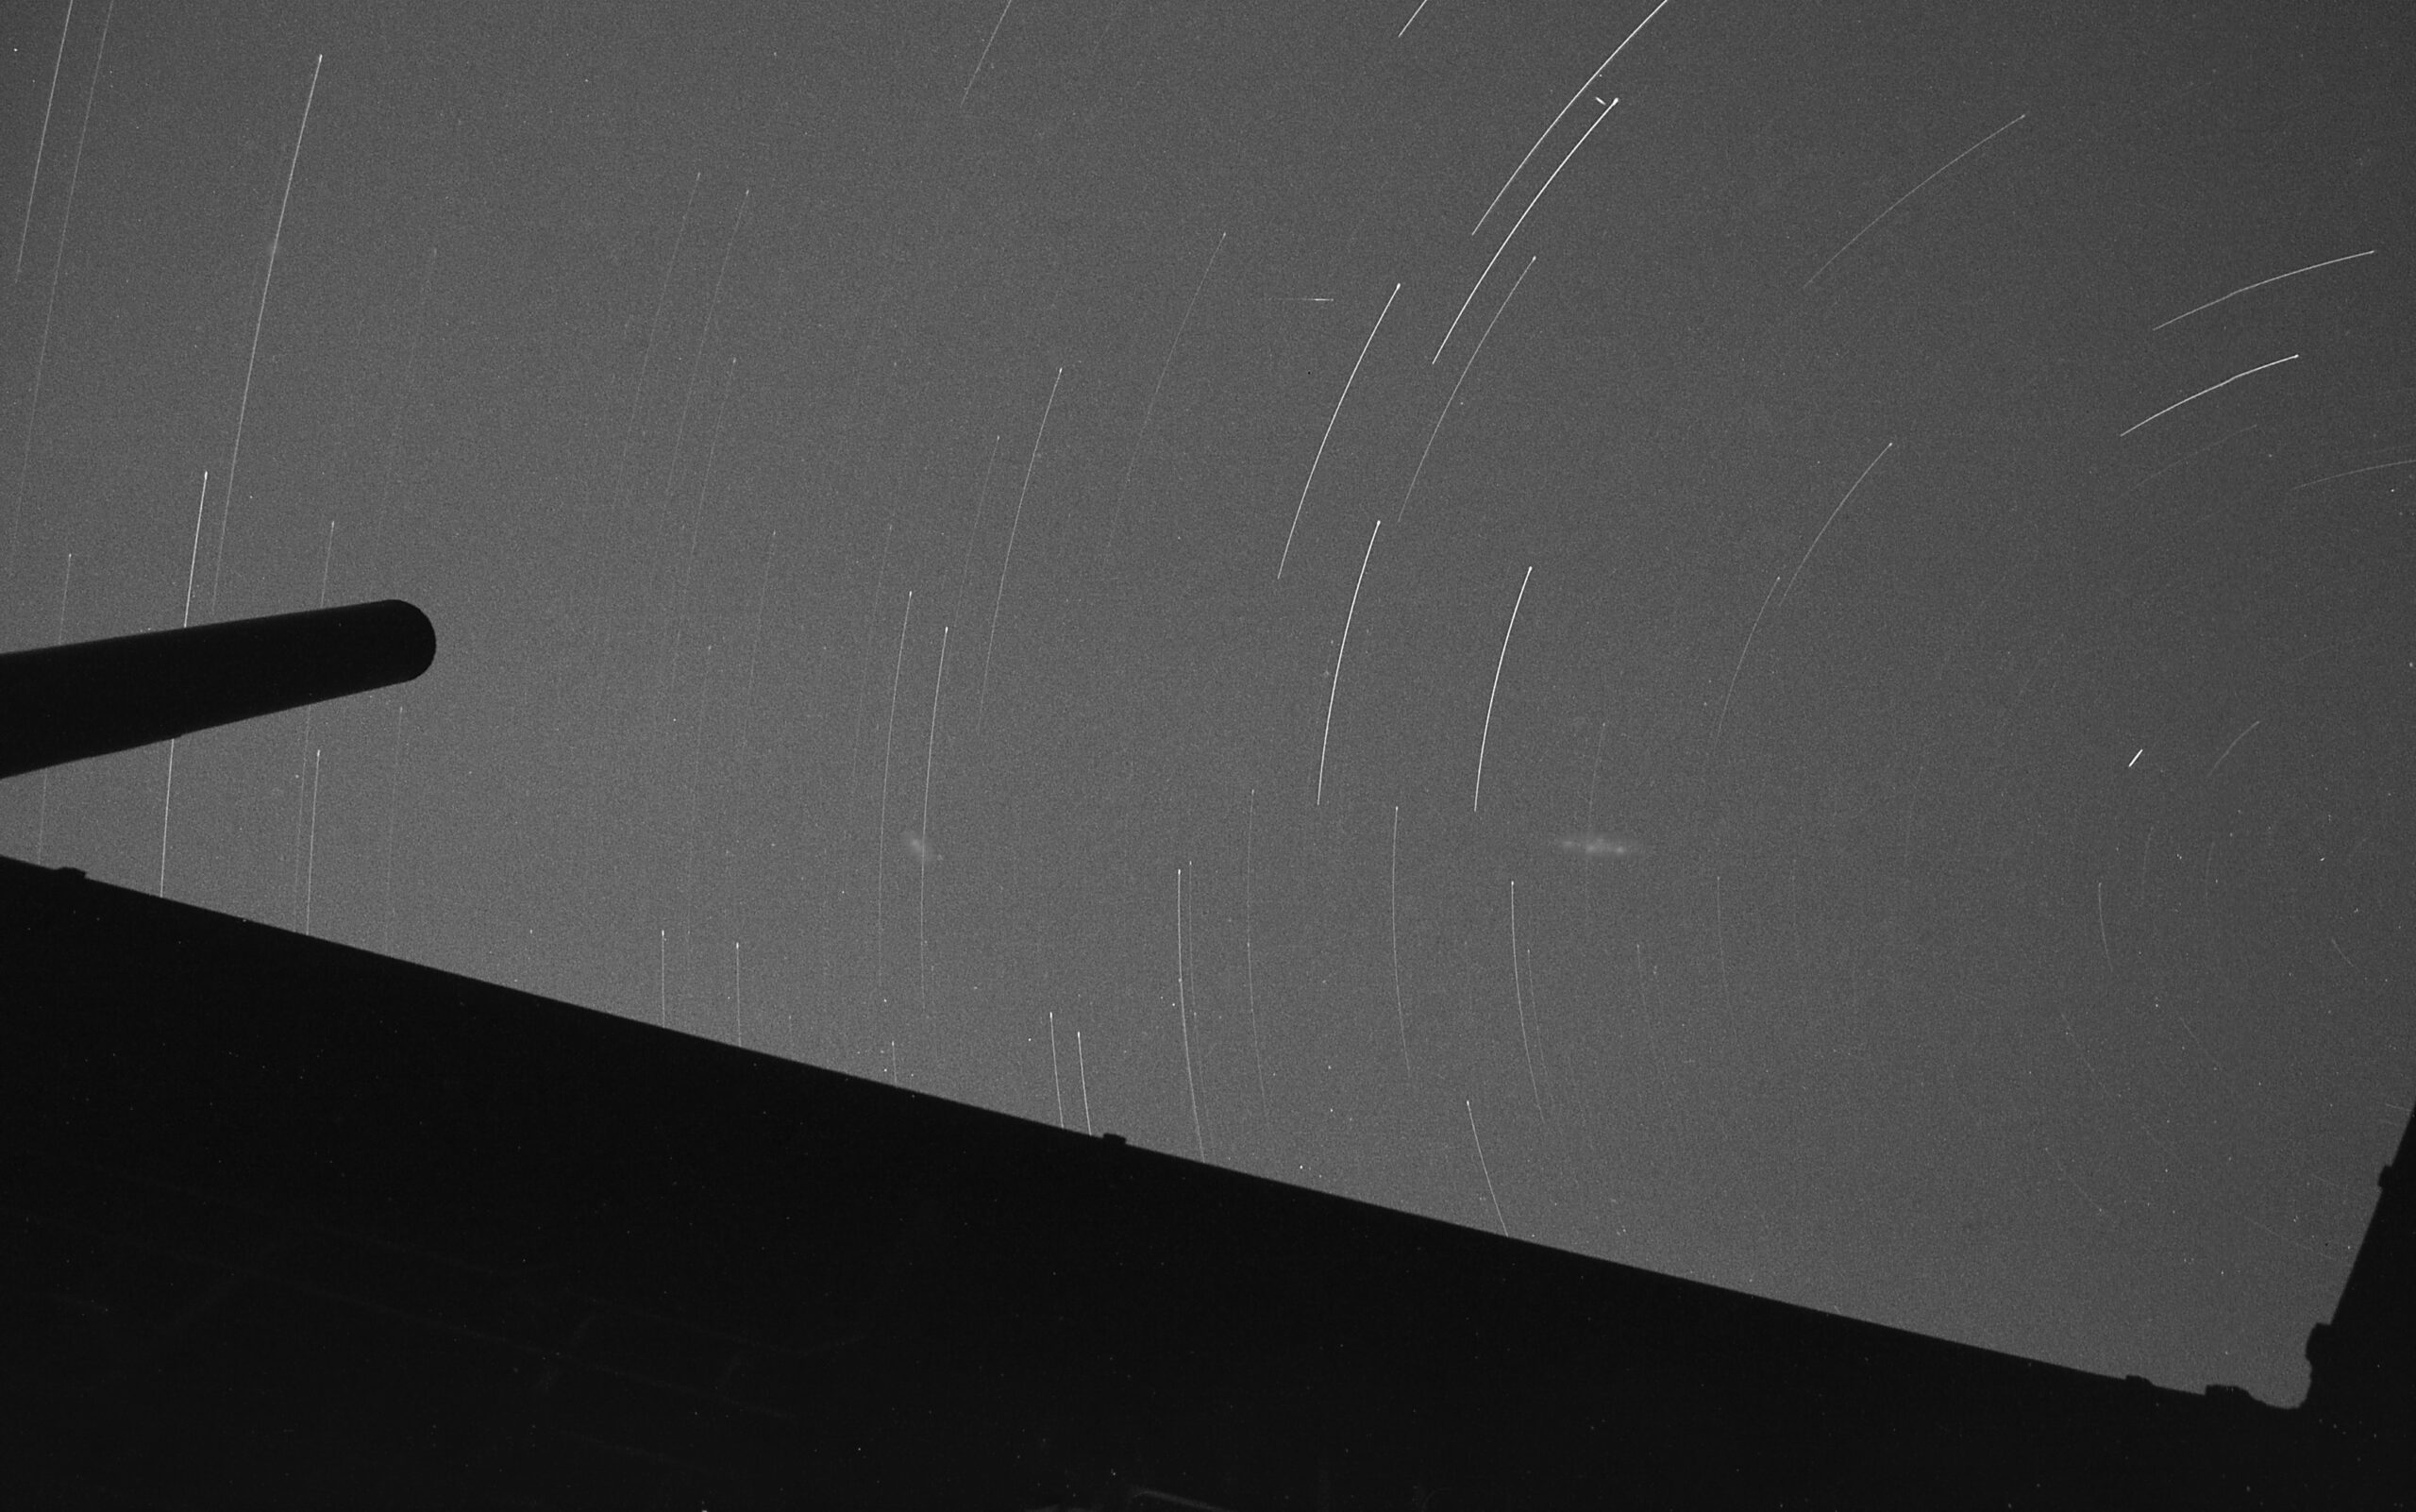 @henry_balen Replying to @ILFORDPhoto Star trails on Ilford Pan F during Lockdown Mk1 from our balcony. Comparatively clear skies and no aircraft (for London) #ilfordphoto #fridayfavourites #nightfilm